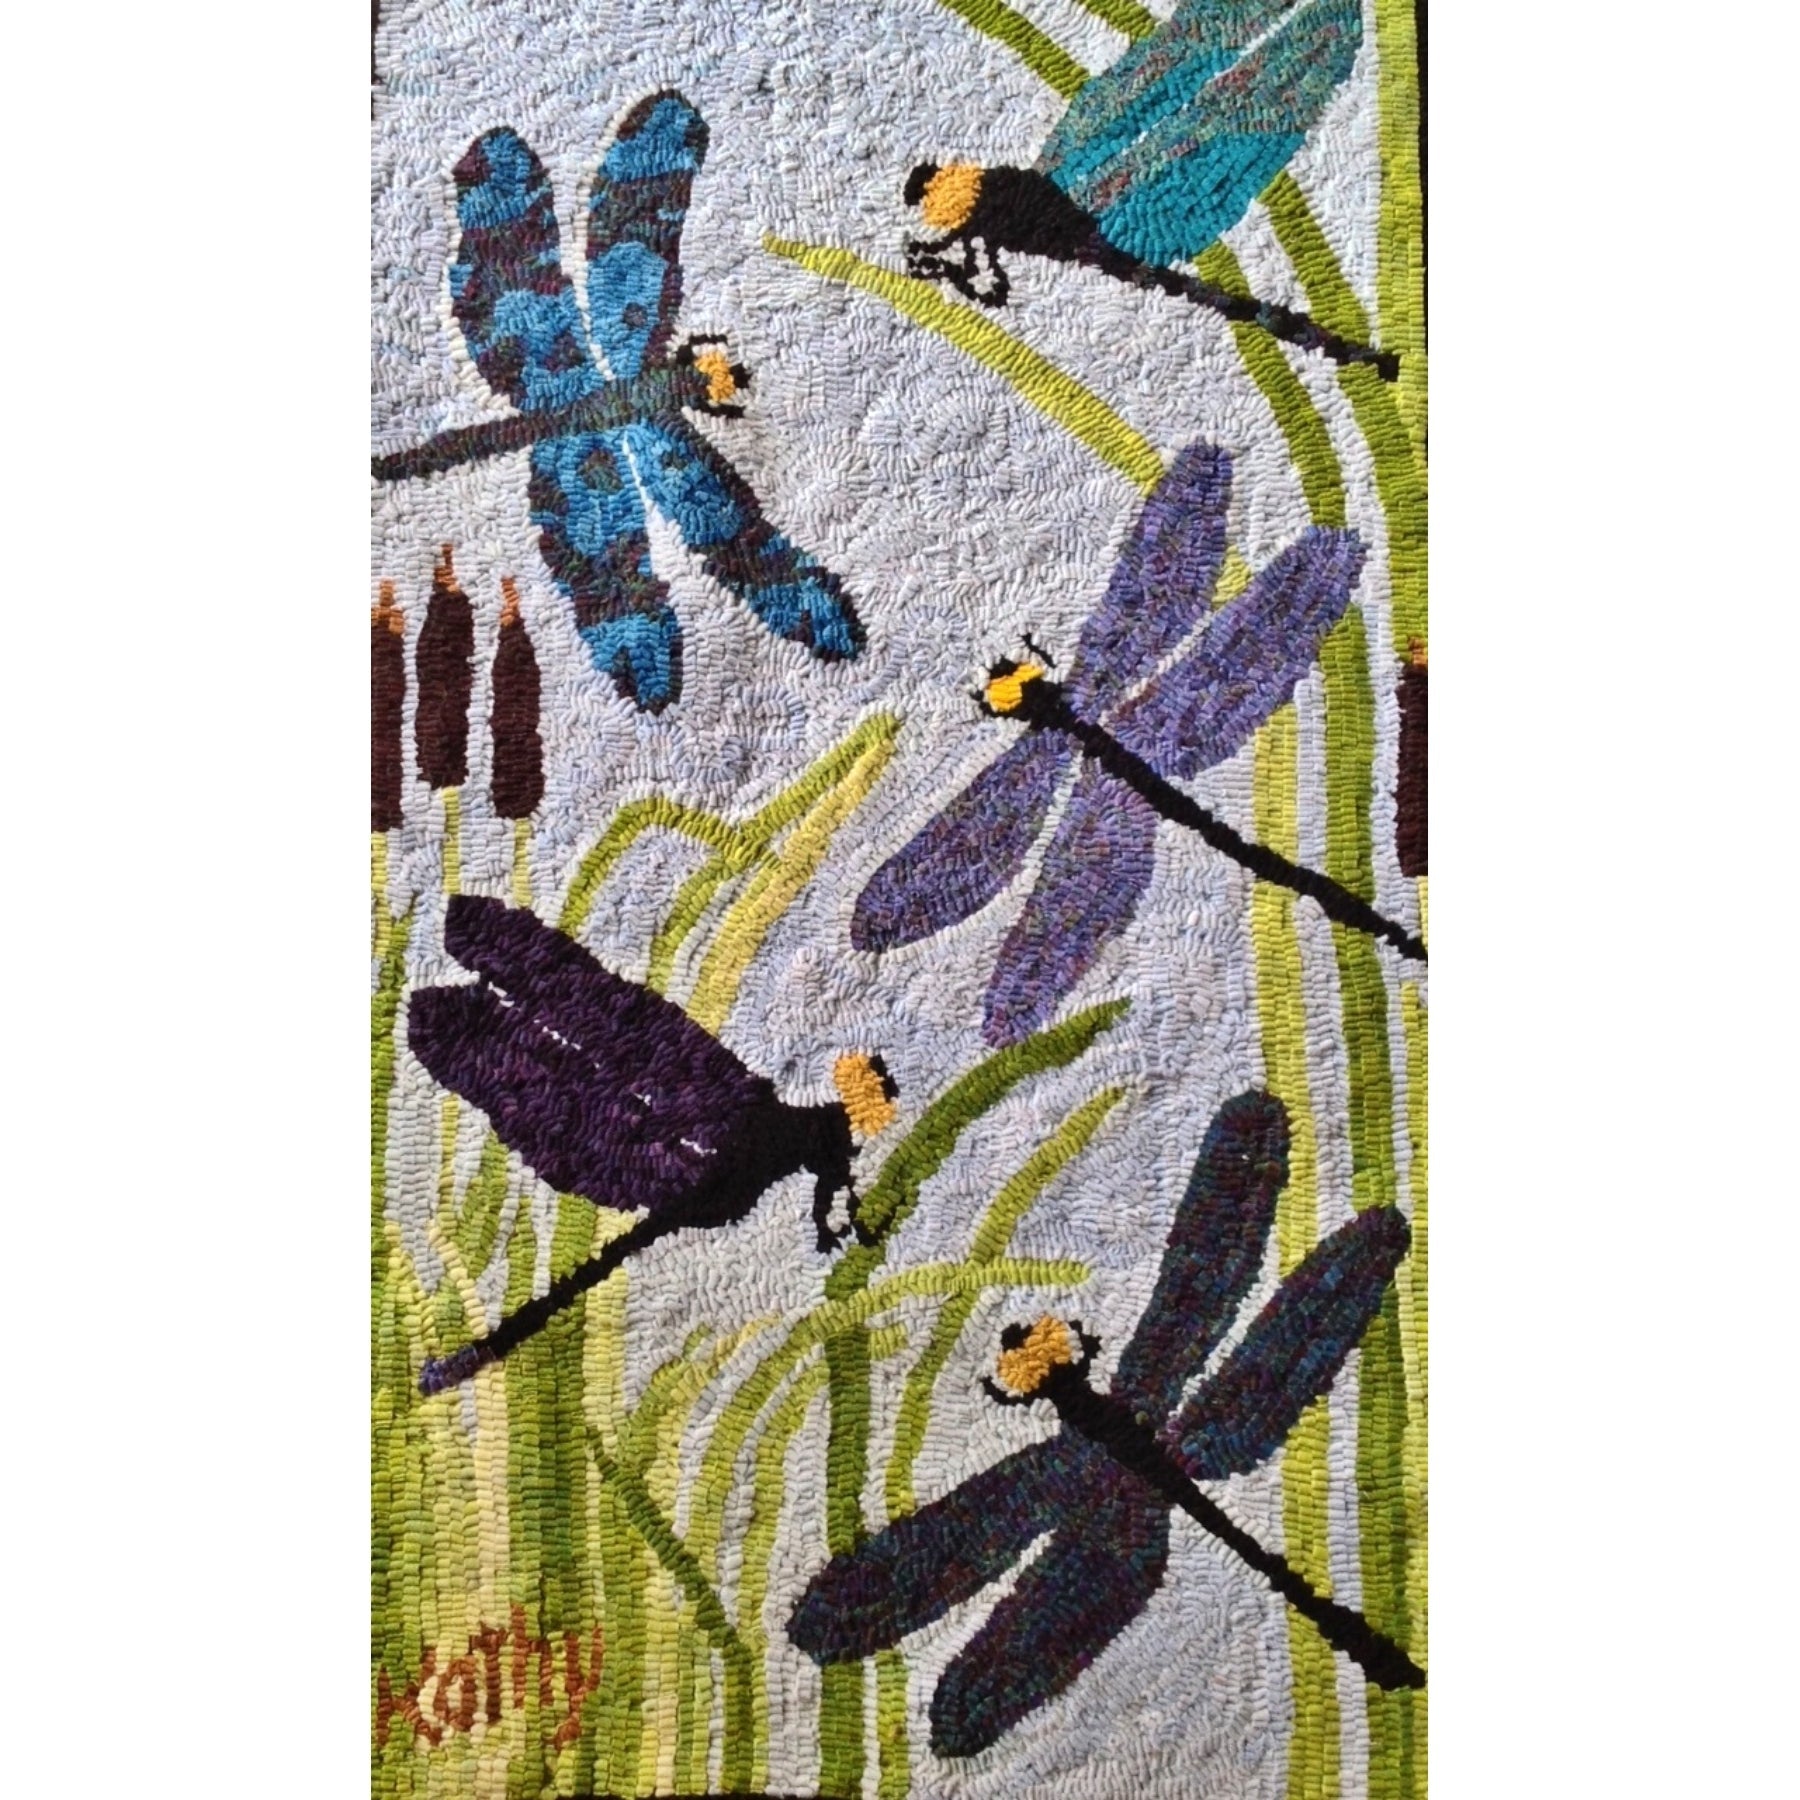 Dragonflies, rug hooked by Kathy Ryer